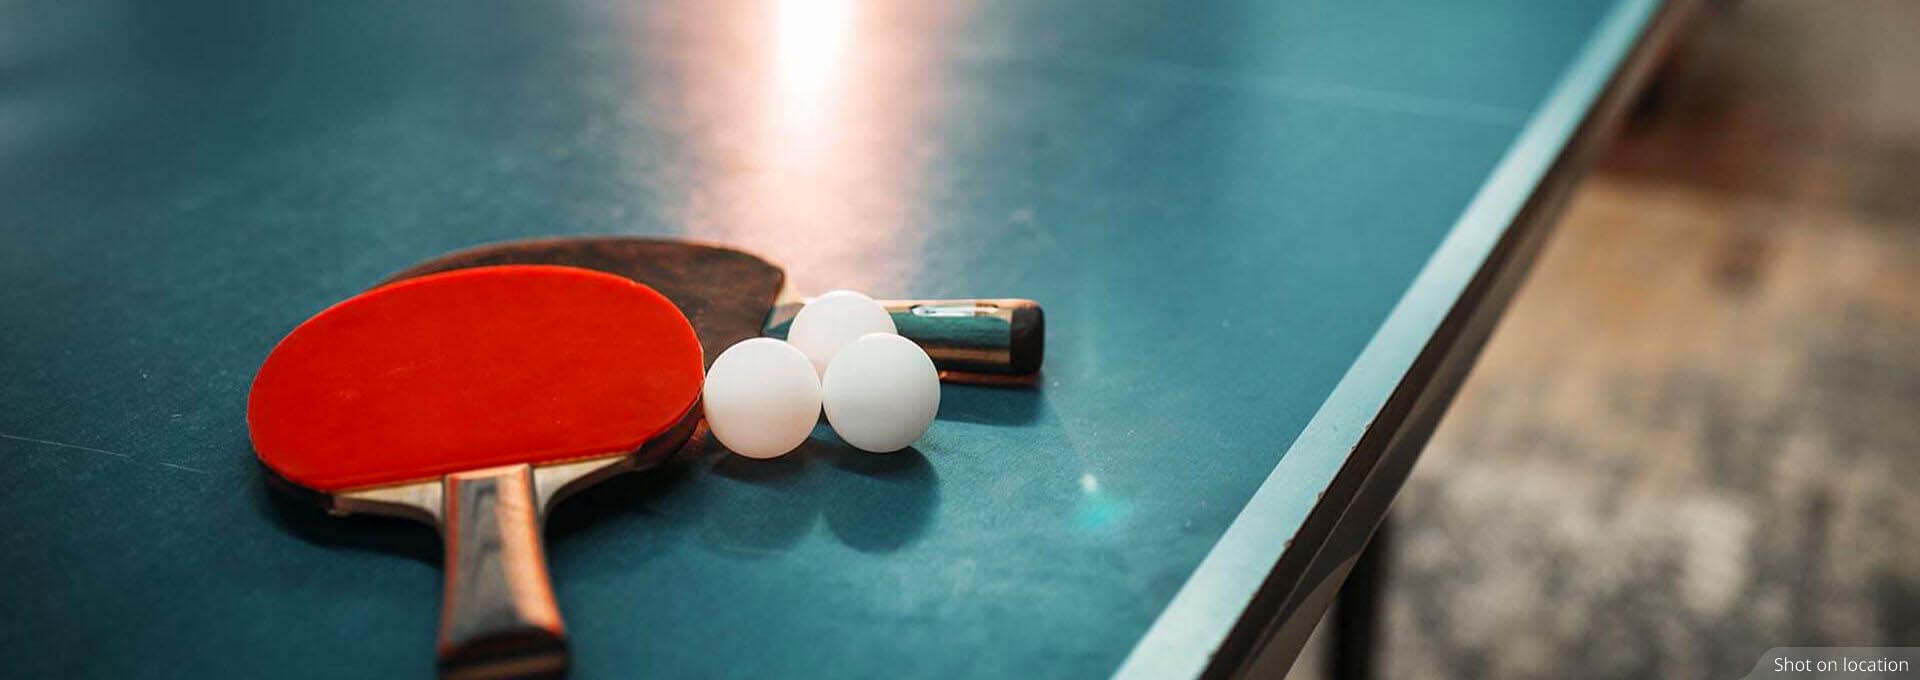 Table tennis court near Cottages by House of Hiranandani in Devanahalli, Bengaluru